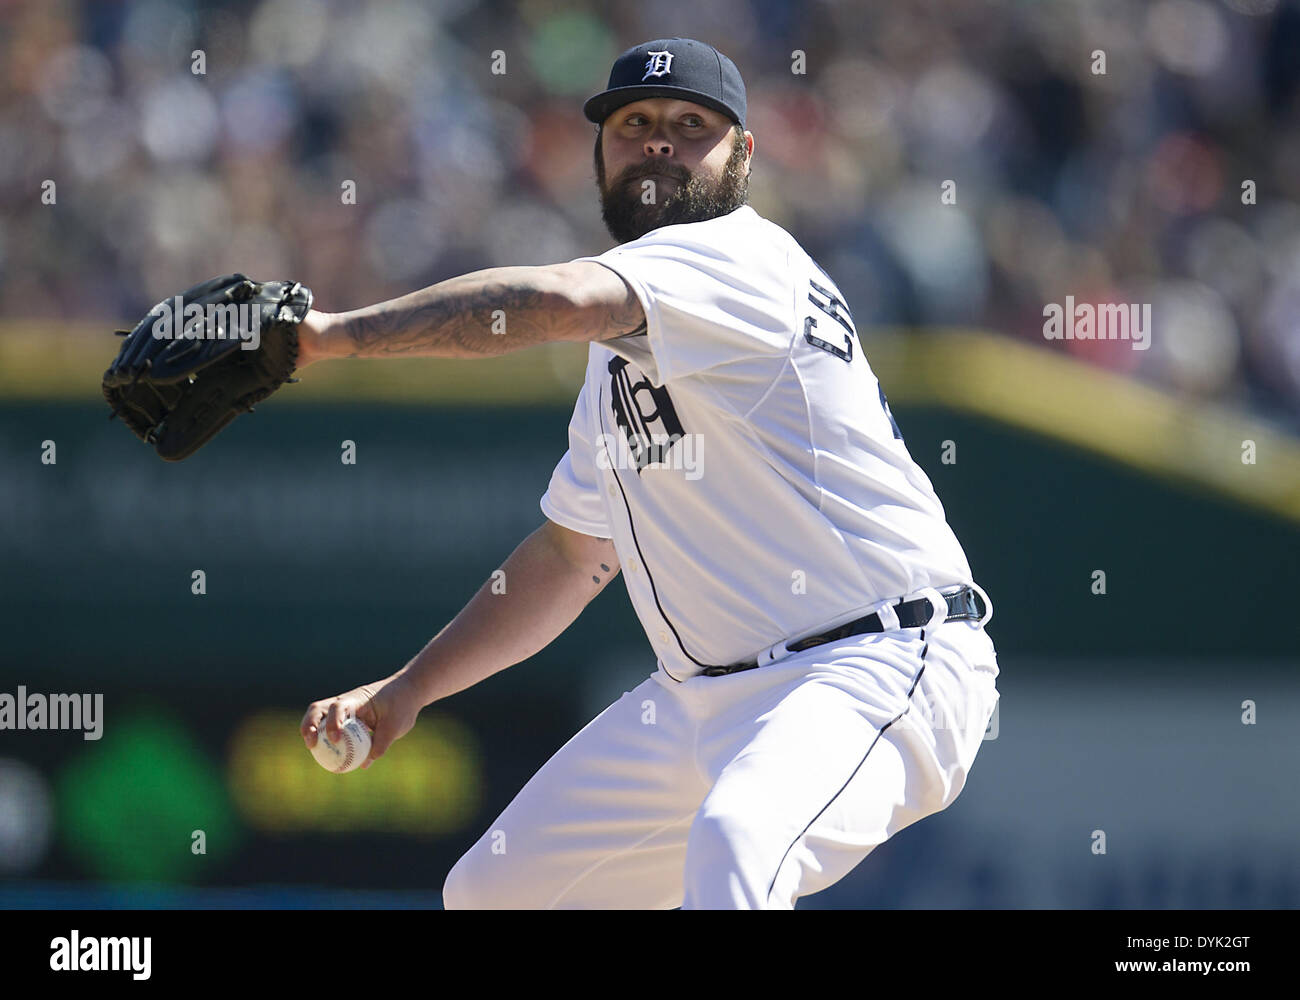 Detroit, Michigan, USA. 19th Apr, 2014. April 19, 2014: Detroit Tigers pitcher Joba Chamberlain (44) delivers pitch during MLB game action between the Los Angeles Angels and the Detroit Tigers at Comerica Park in Detroit, Michigan. The Tigers defeated the Angels 5-2. © csm/Alamy Live News Stock Photo